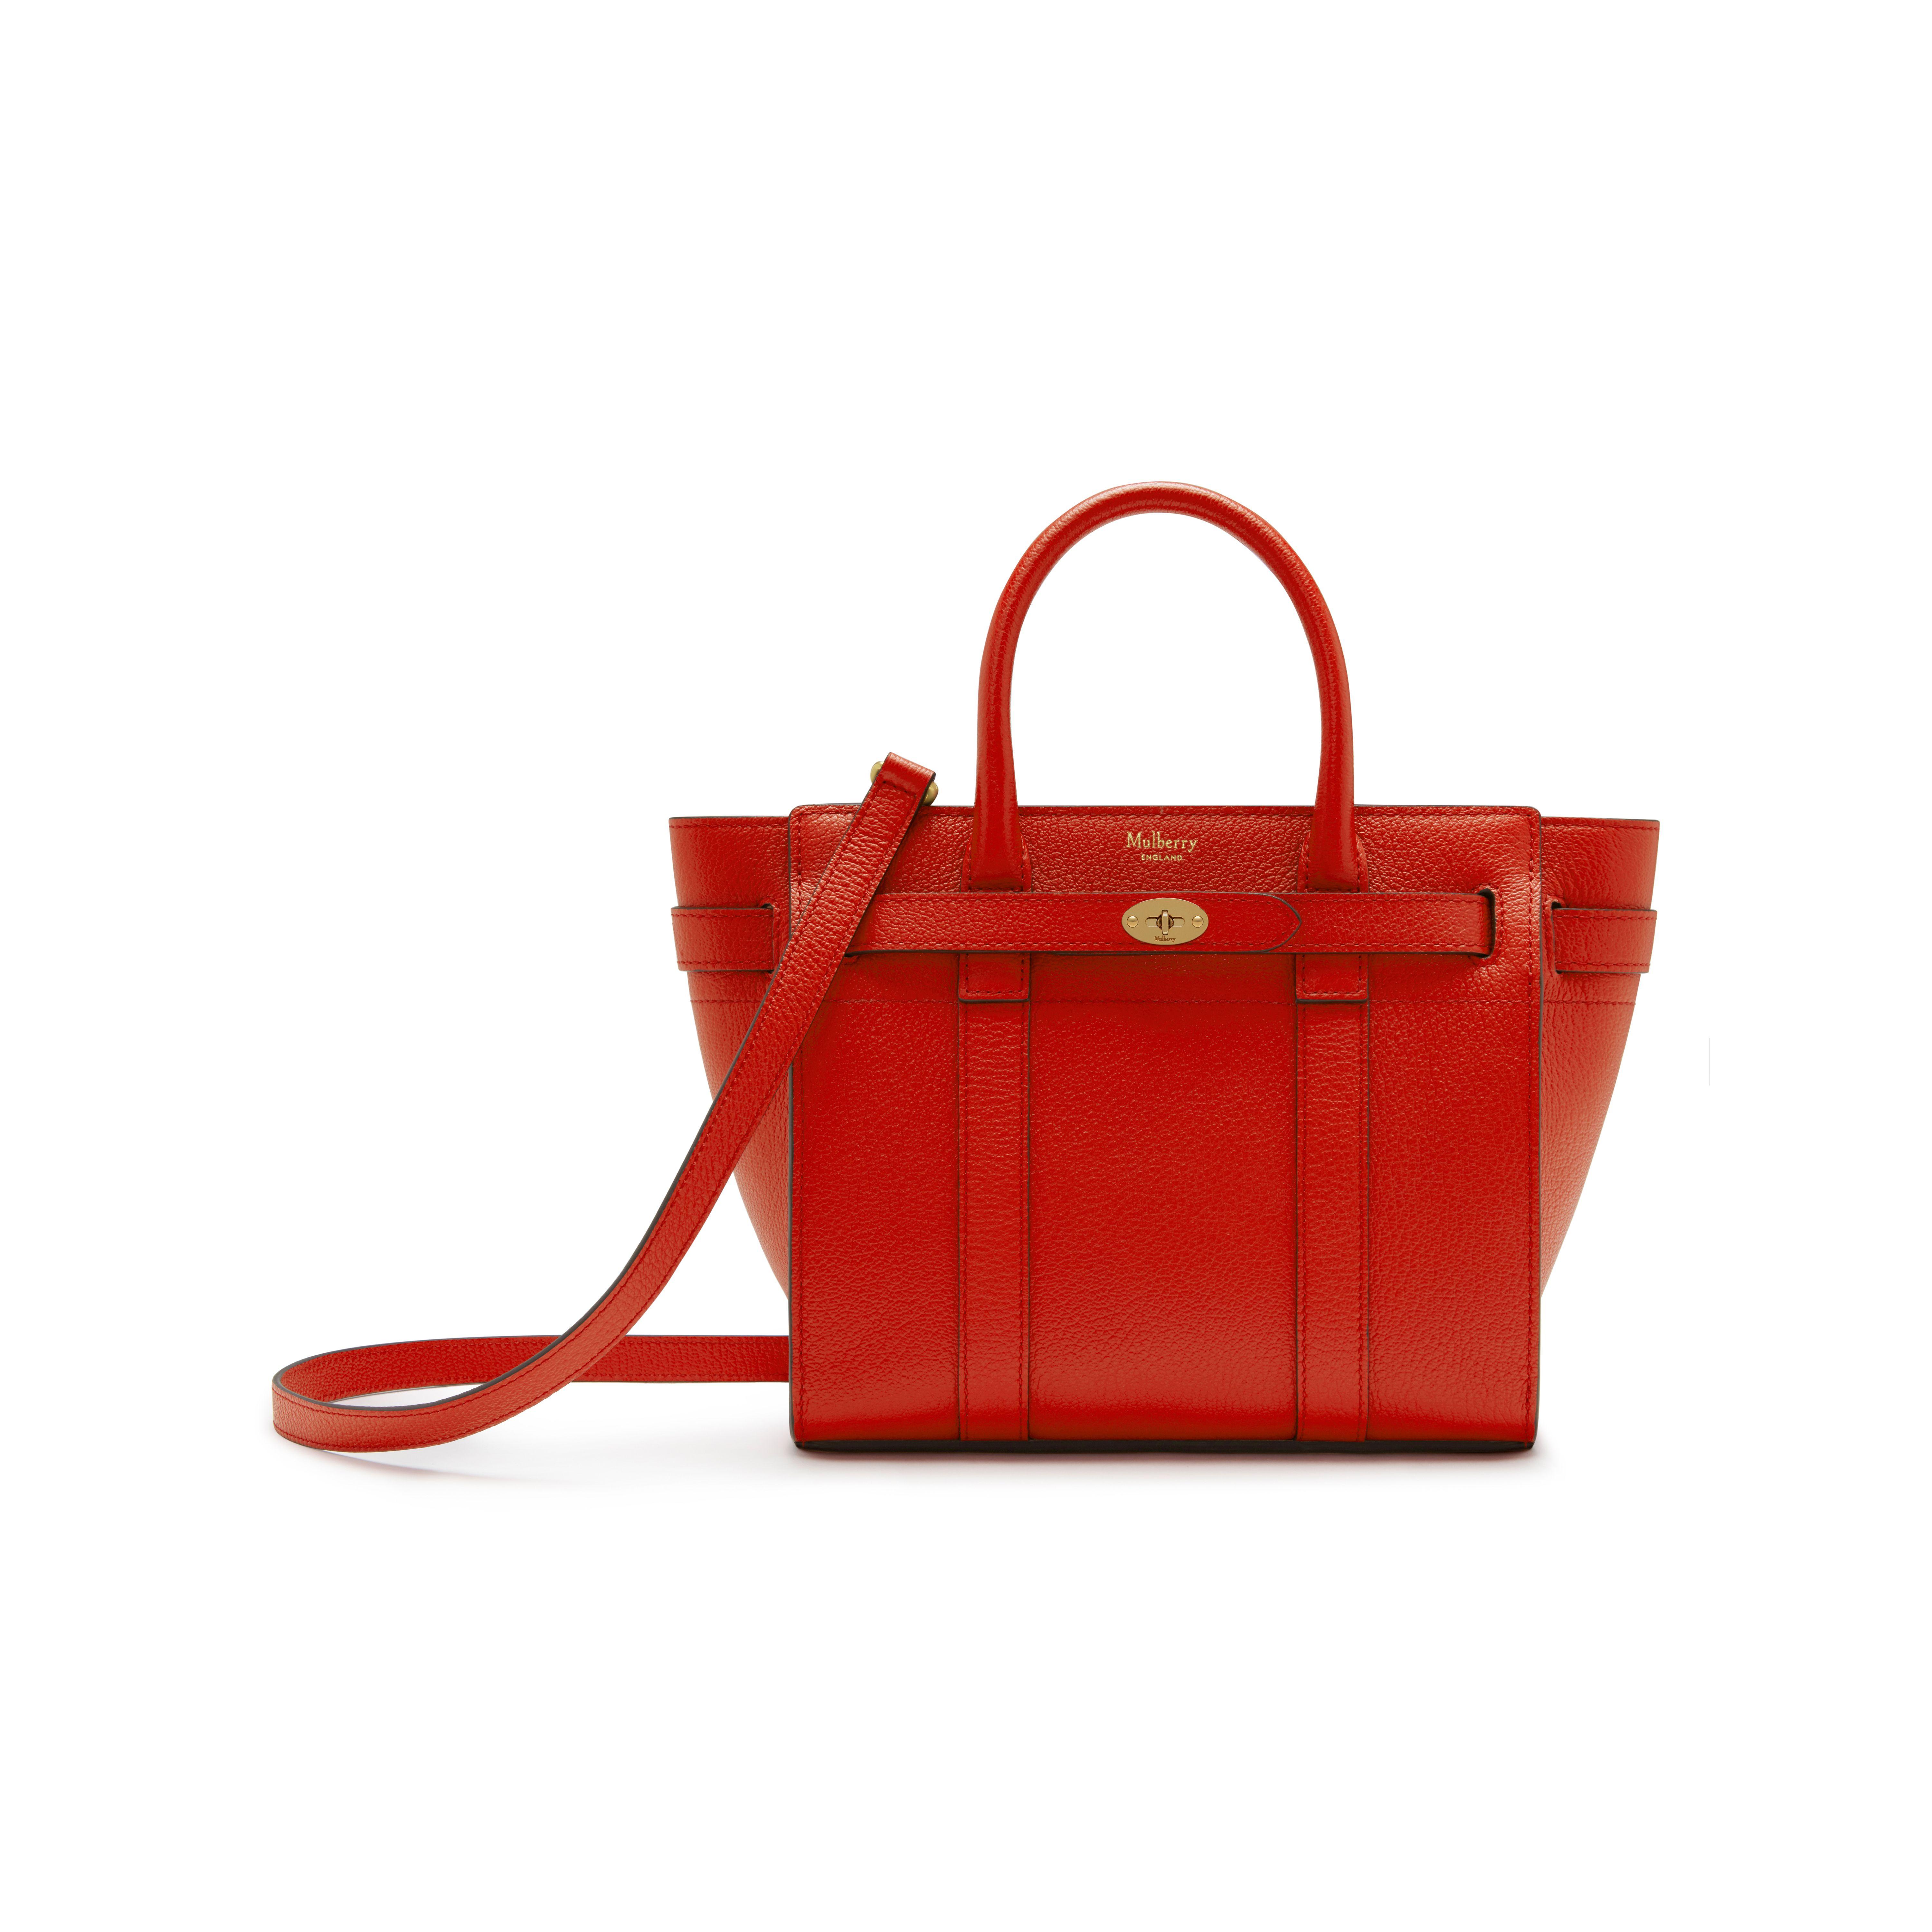 mulberry Bayswater backpack scarlet red leather small classic grain bag